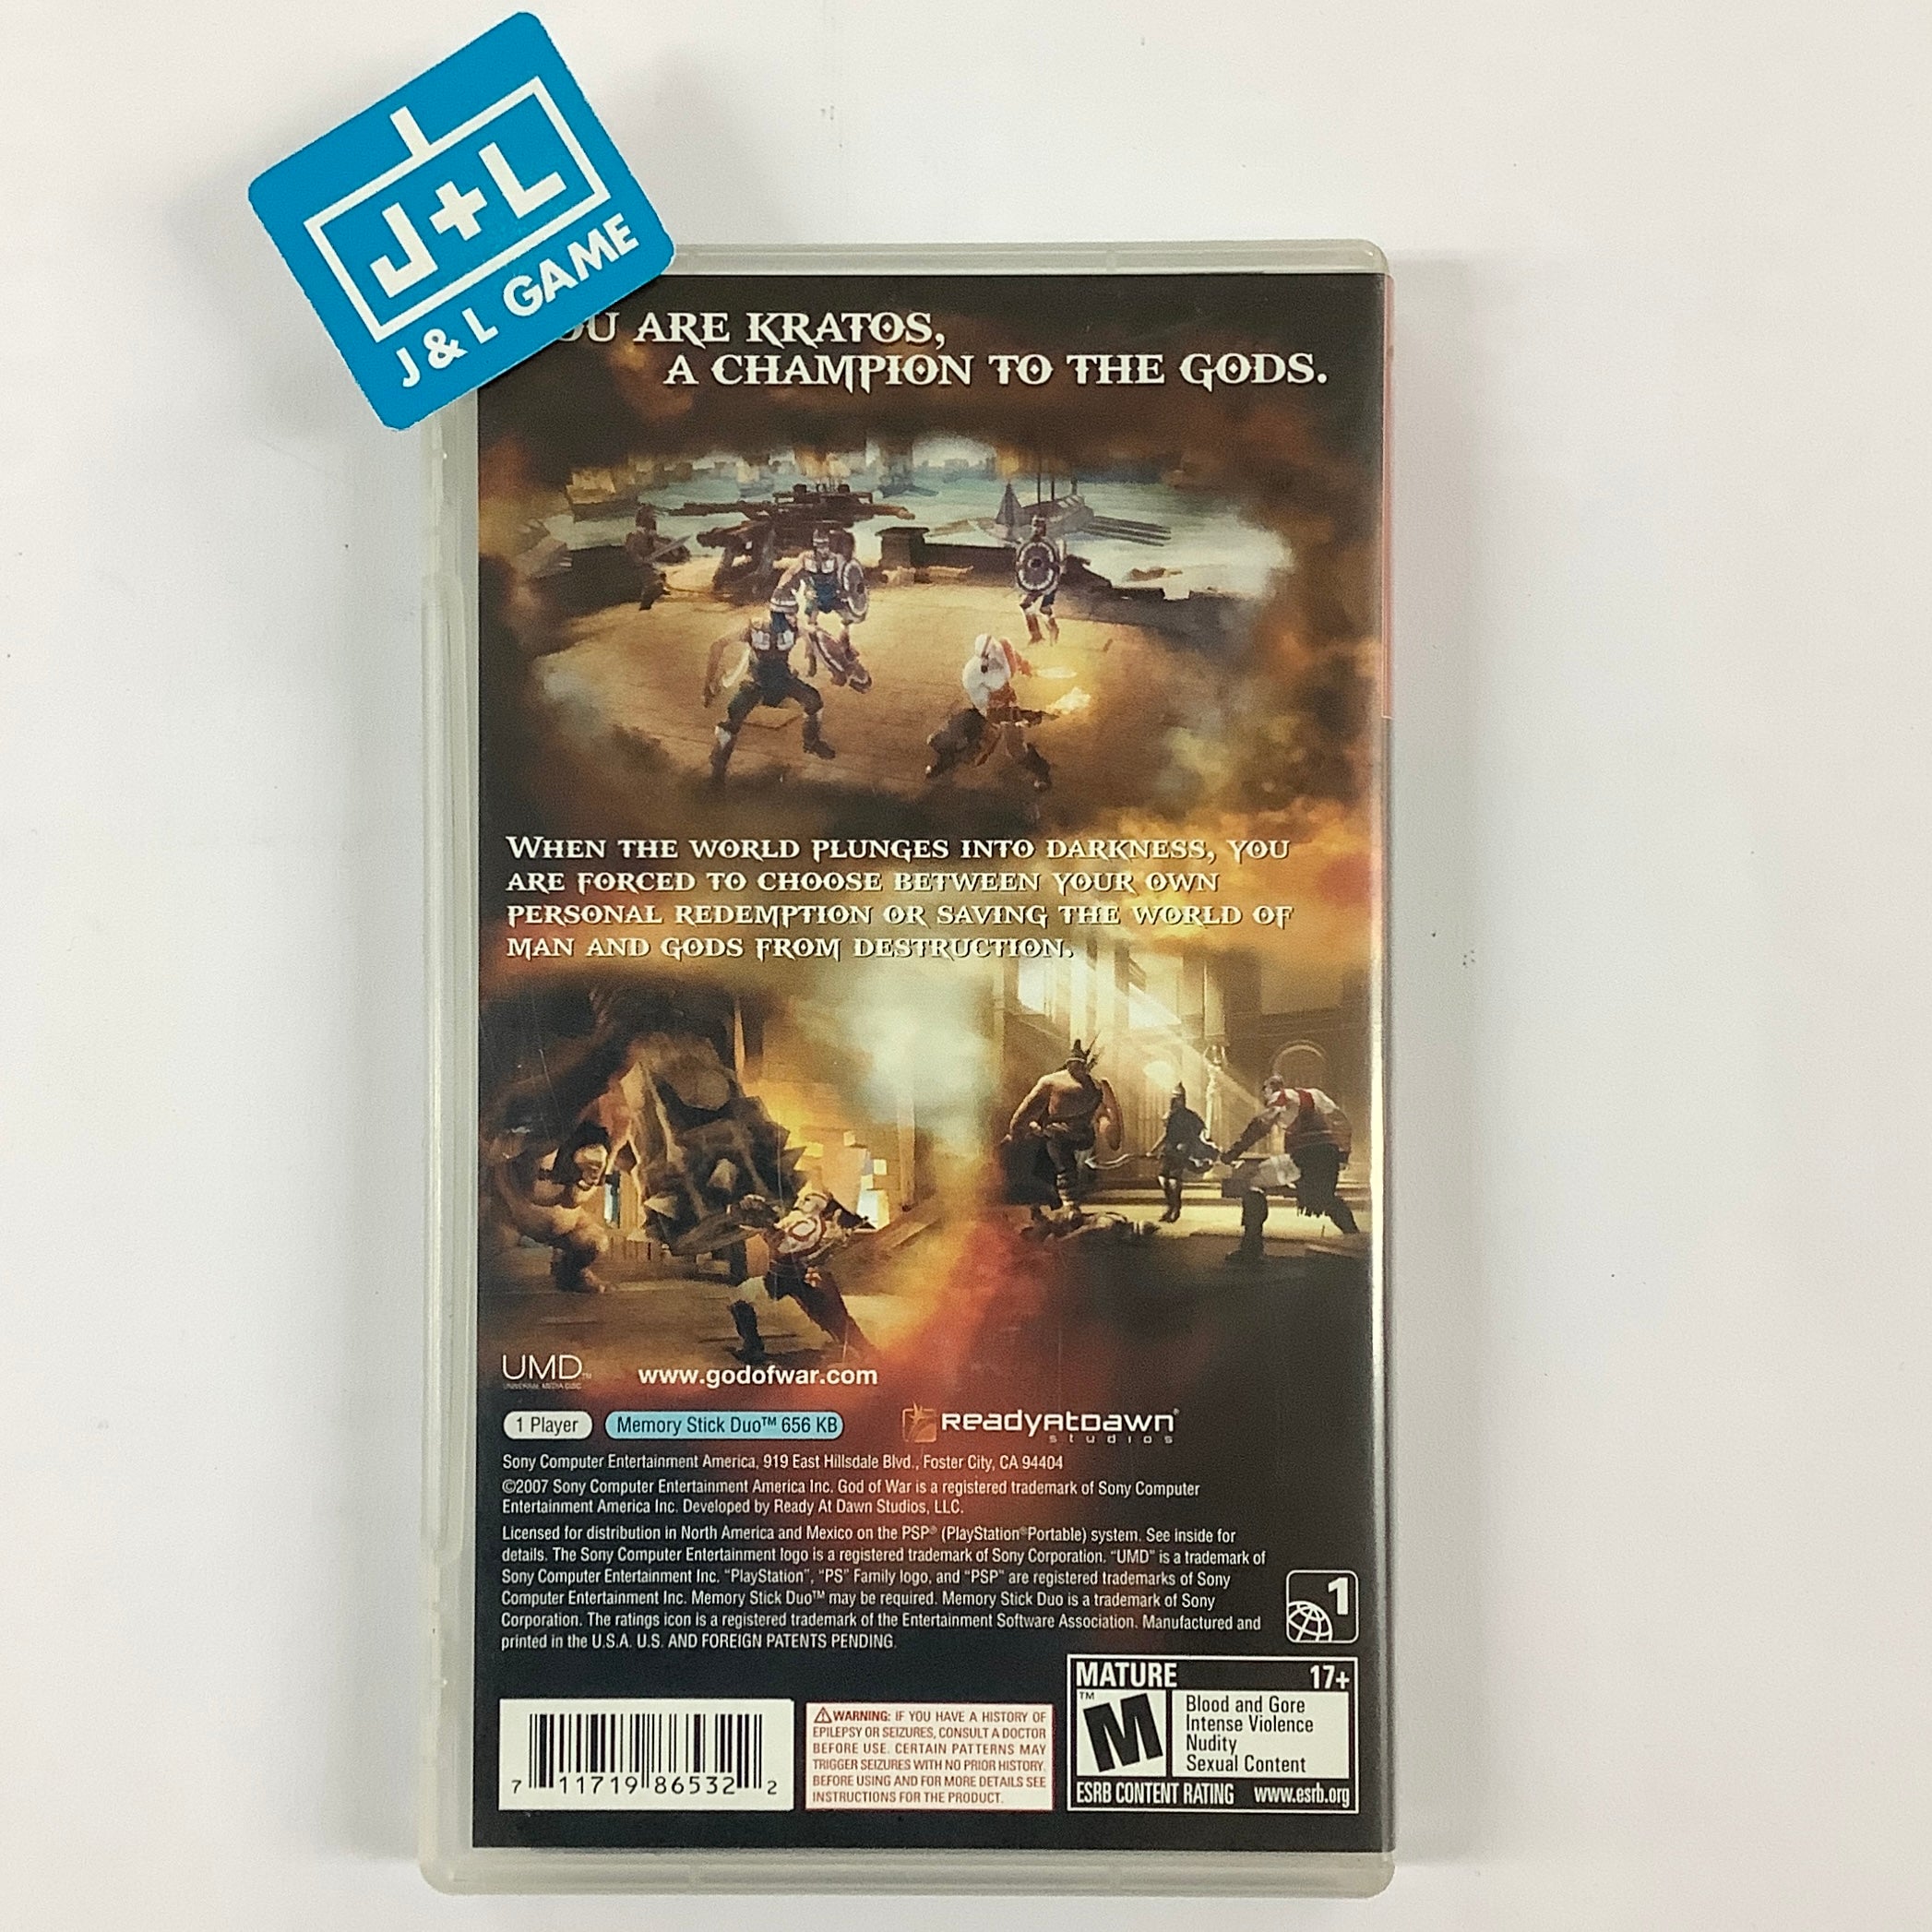 God of War: Chains of Olympus (Greatest Hits) - Sony PSP [Pre-Owned] Video Games SCEA   